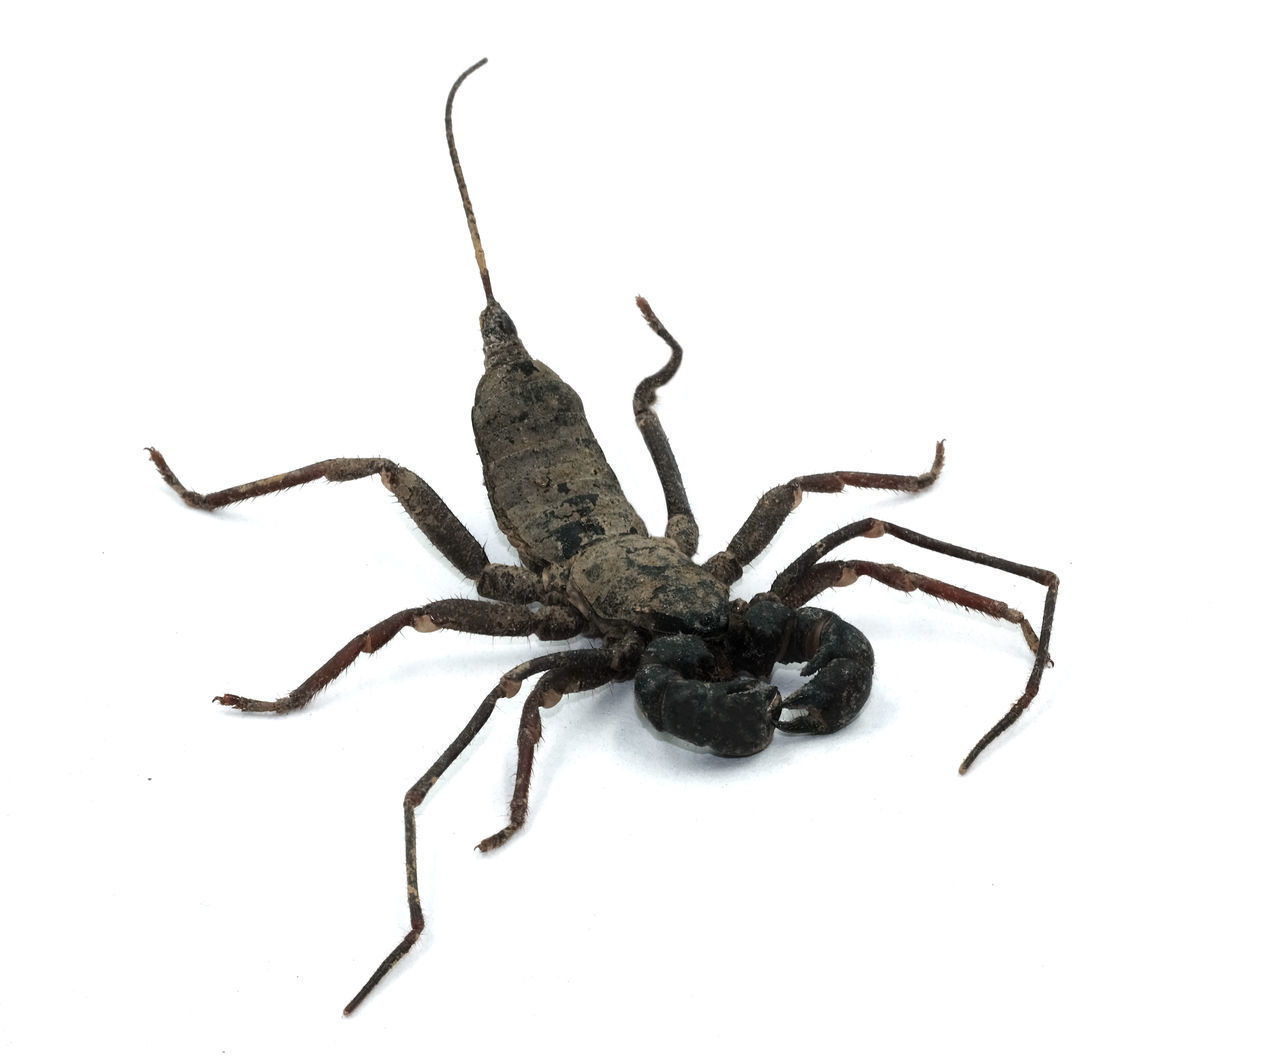 CLOSE-UP OF SPIDER AND WHITE BACKGROUND